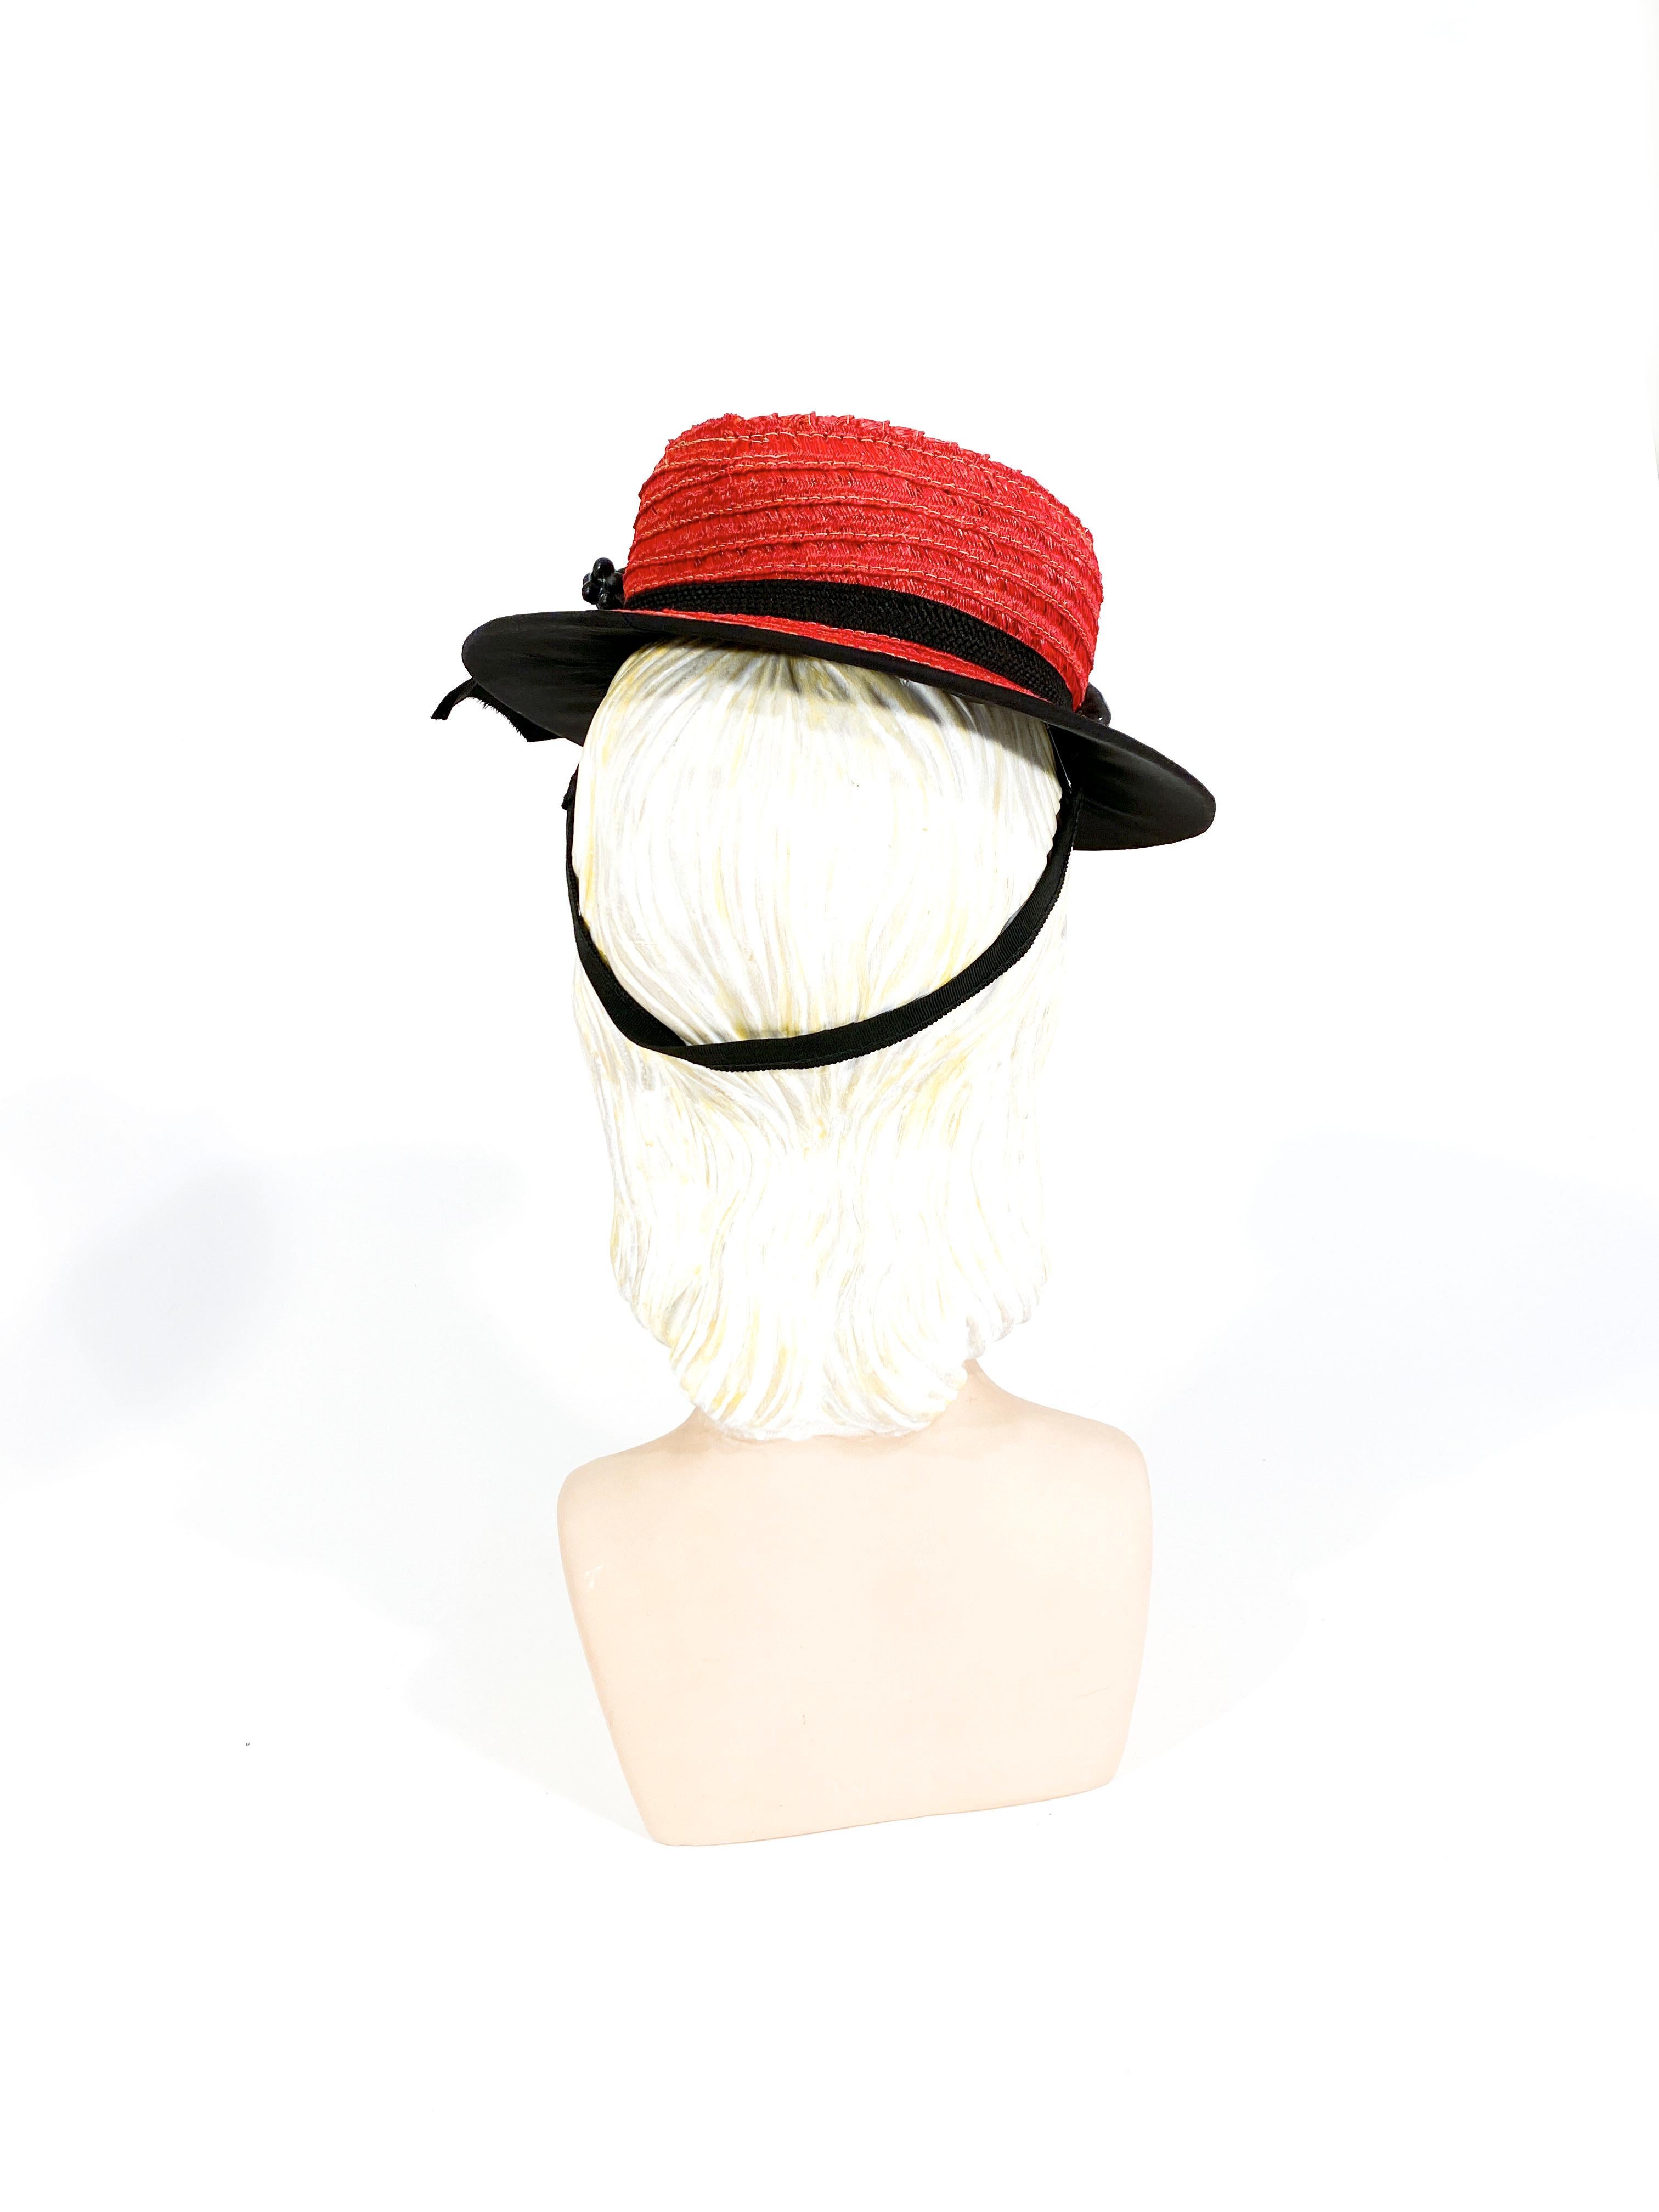 Women's or Men's 1940s Red Straw Toy Pork Pie Perch Hat For Sale